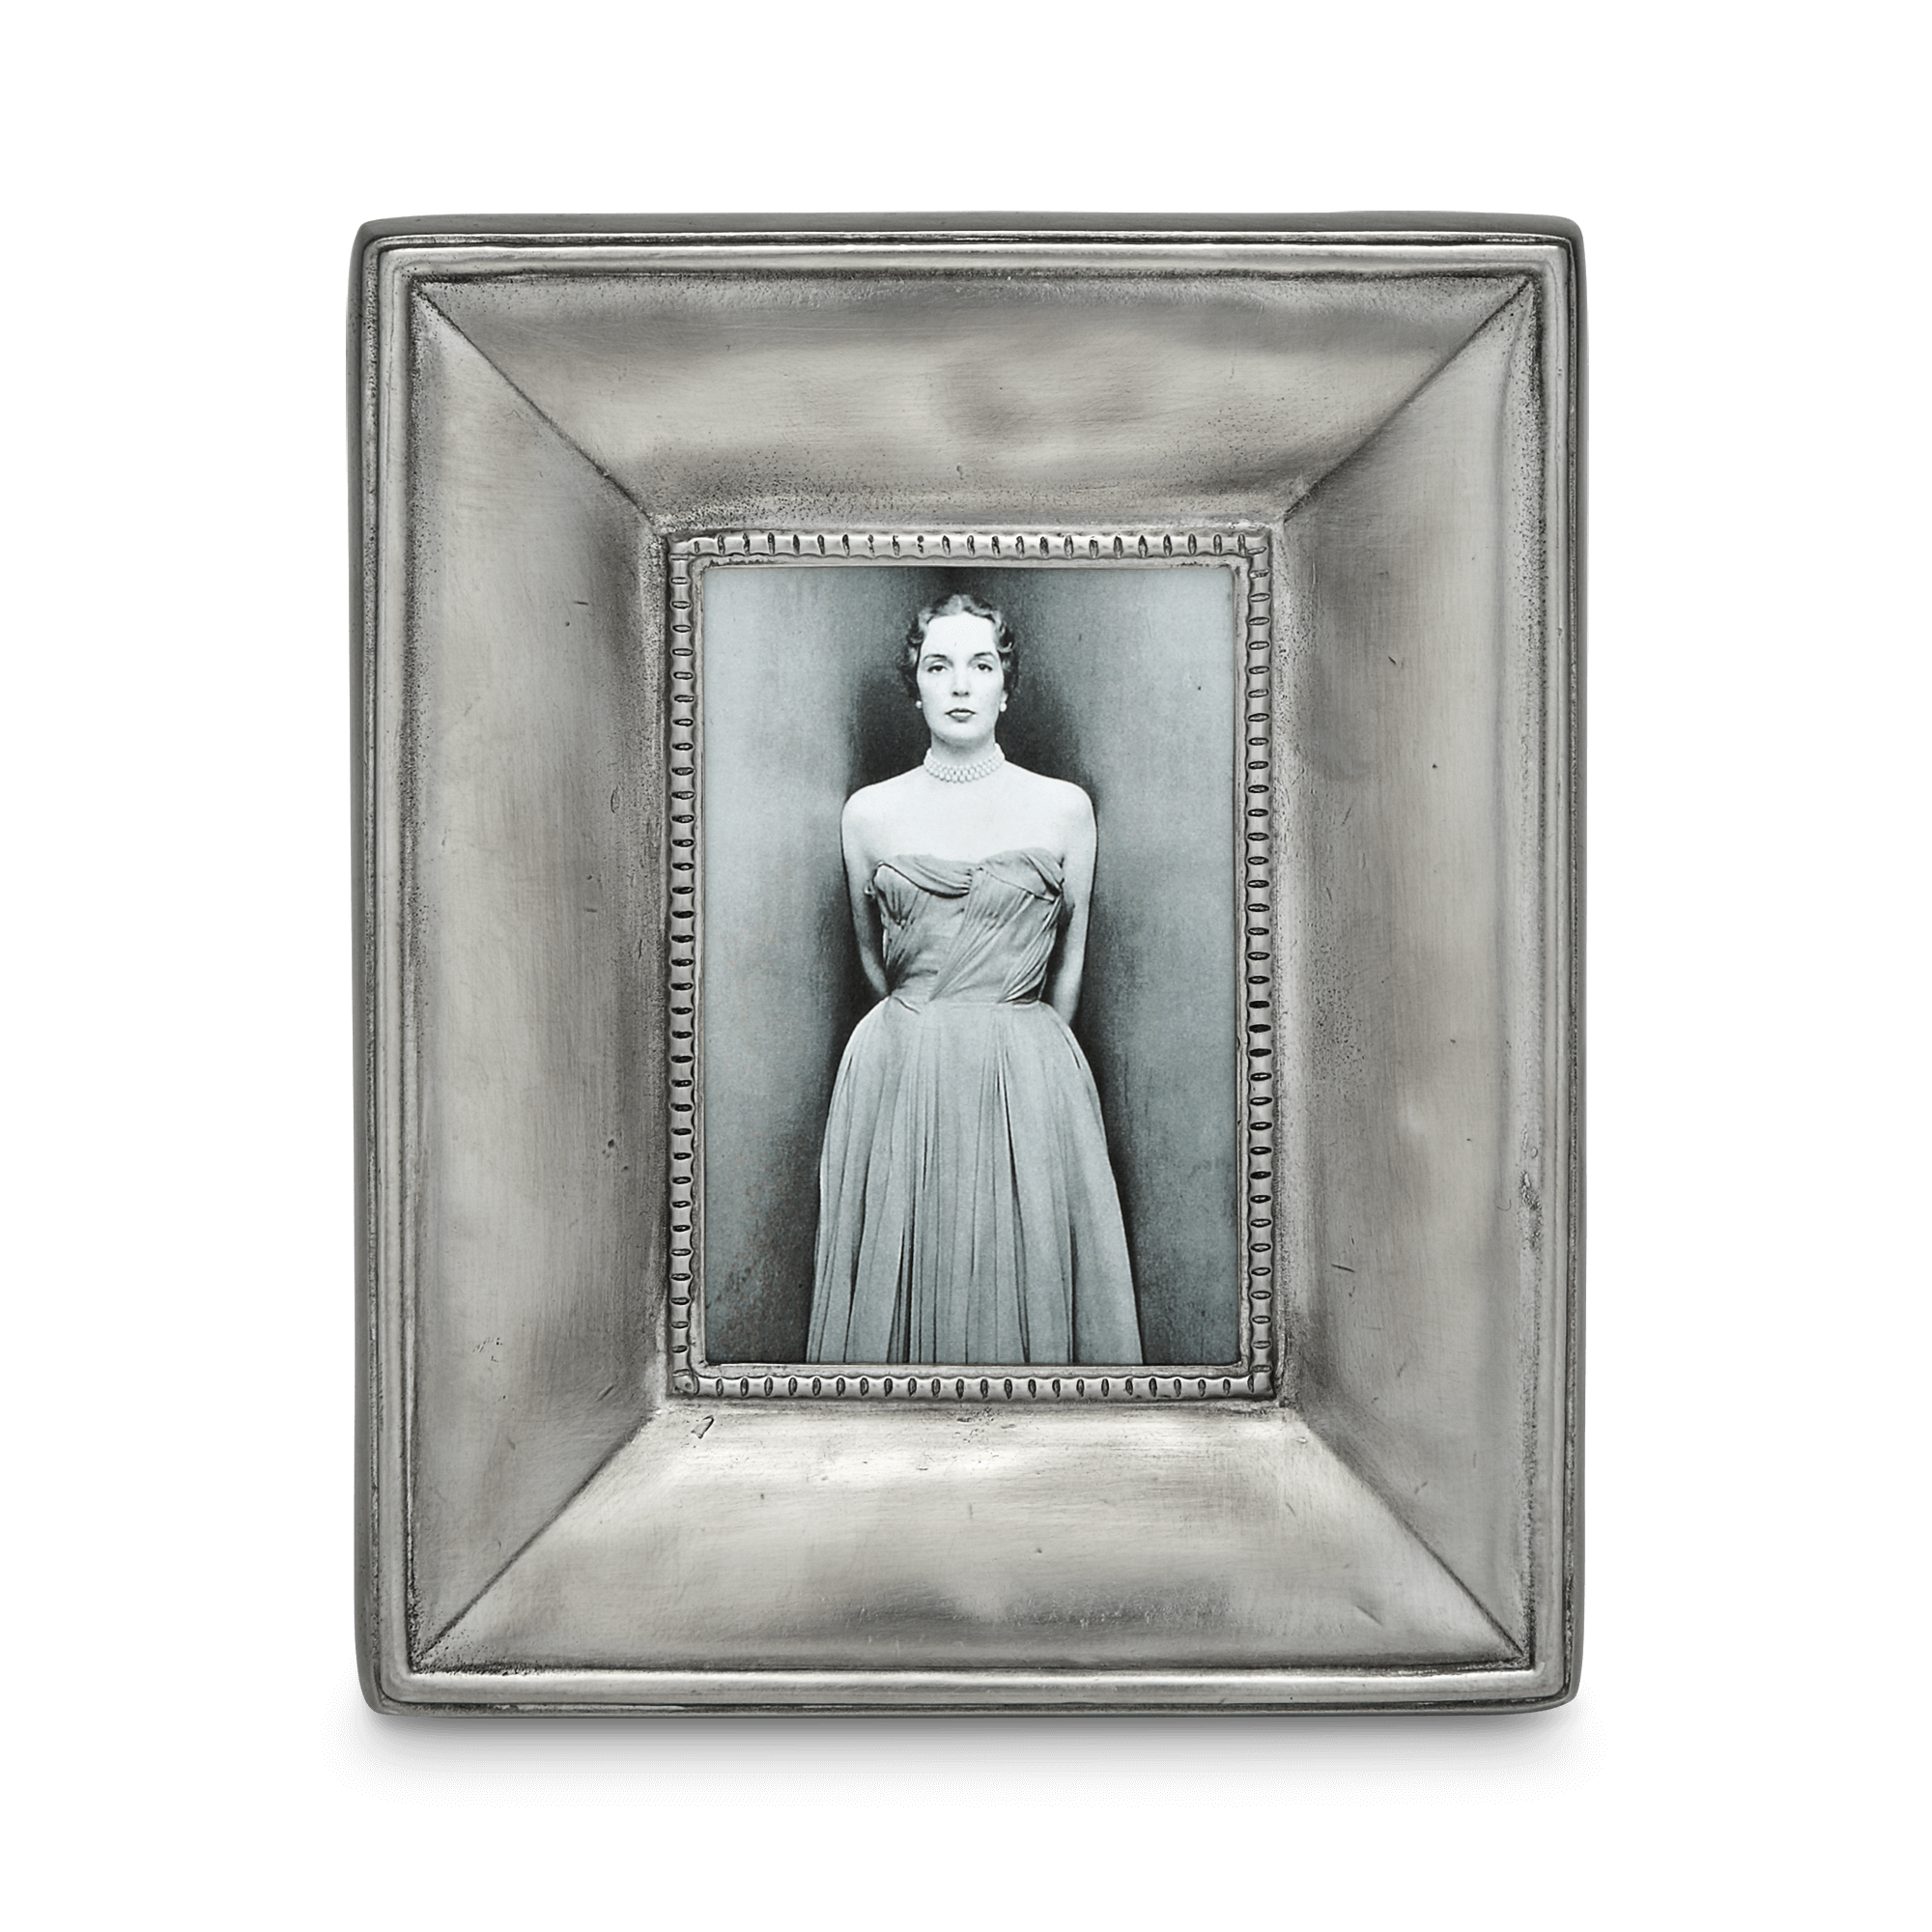 Rippled Pewter Small Photo Frame